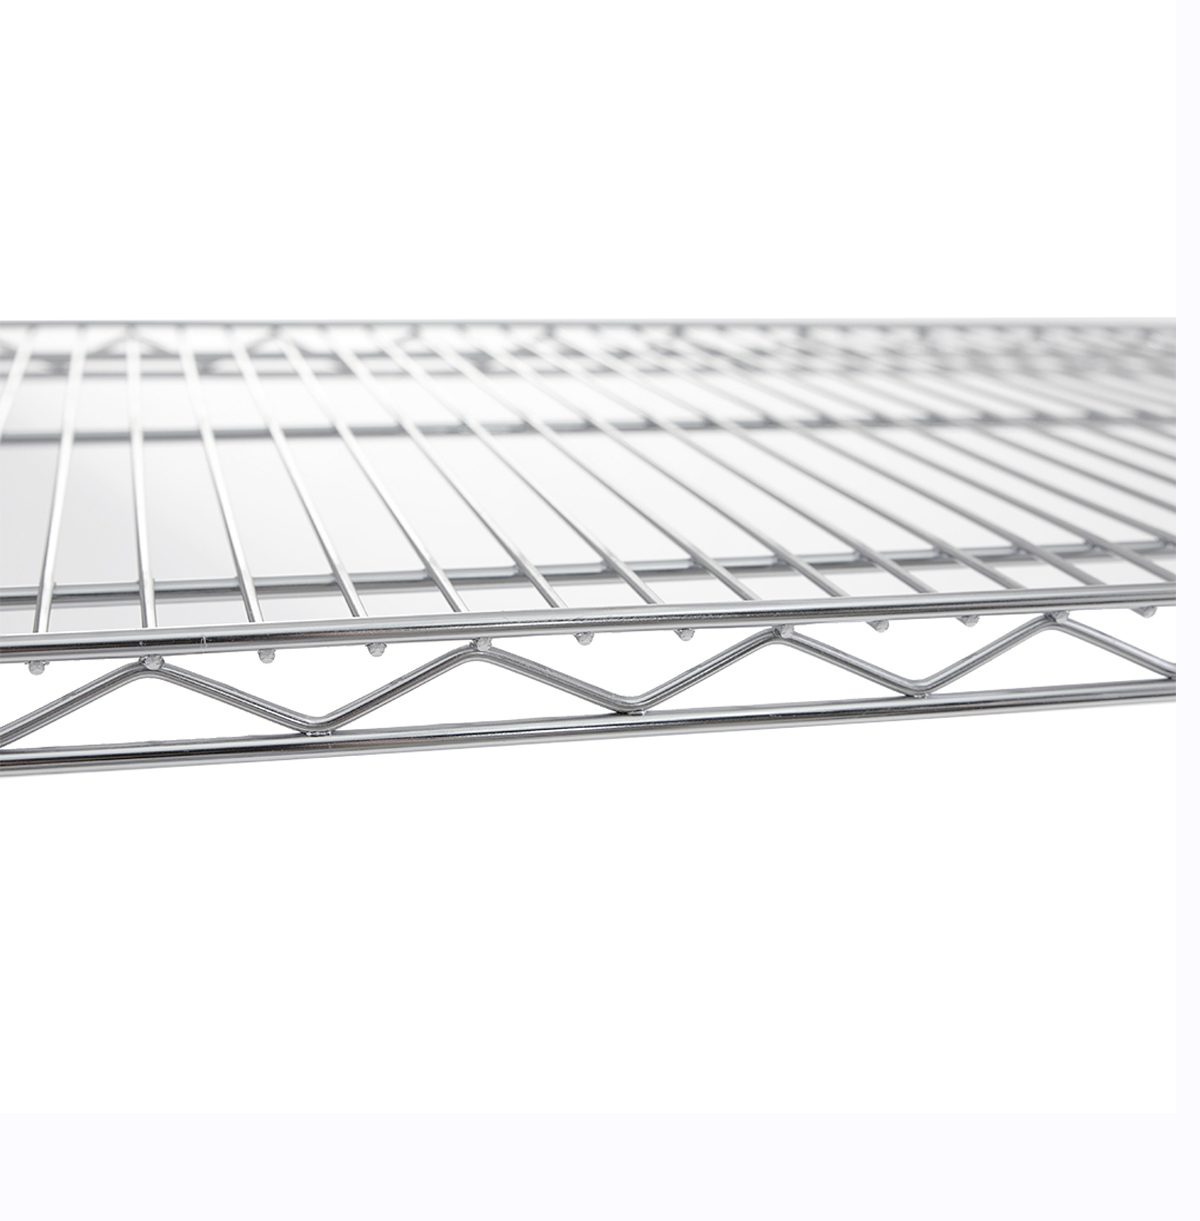 4-Tier Wire Shelf for Industry Storage / Boltless Steel Shelving Unit / Metal Wire Shelving Unit